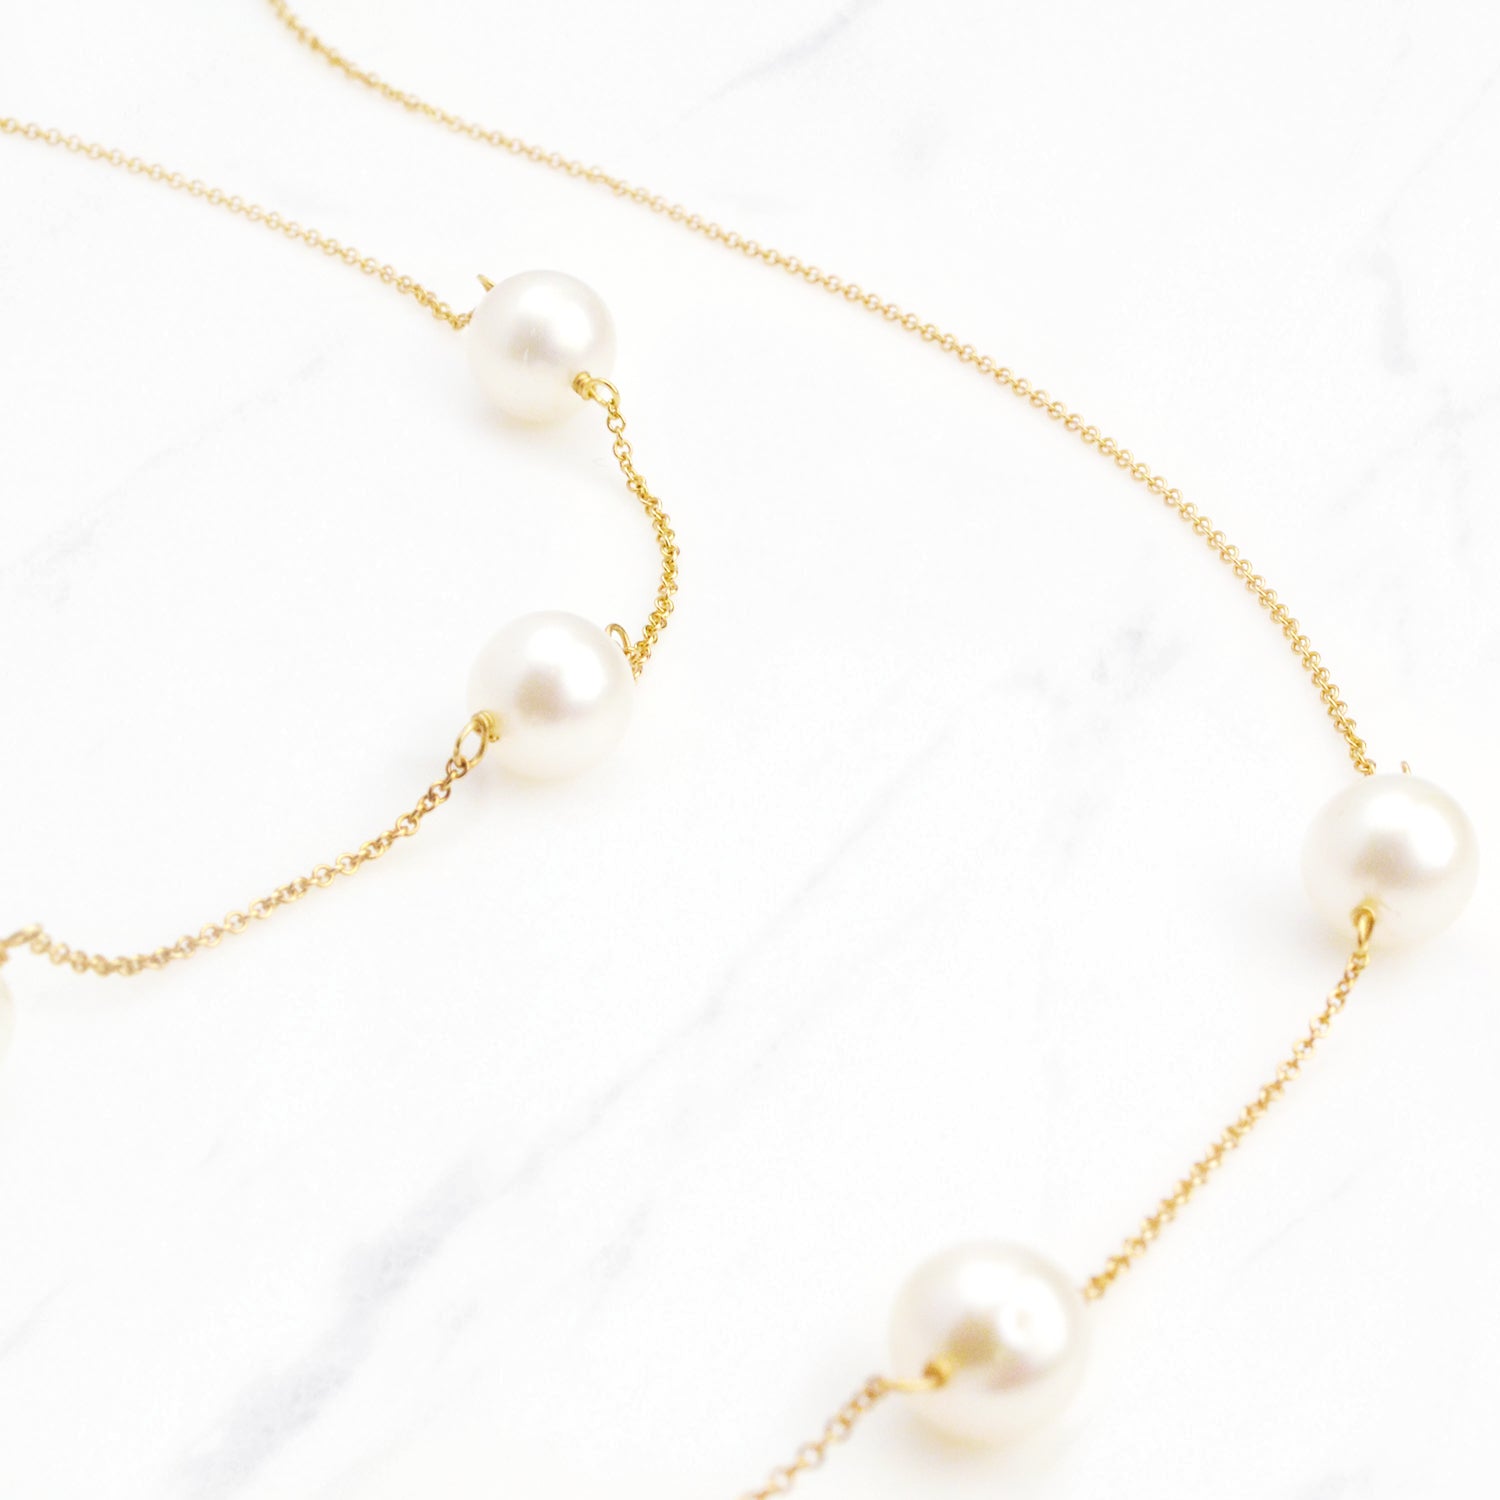 10mm Single Pearl Necklace (80cm)